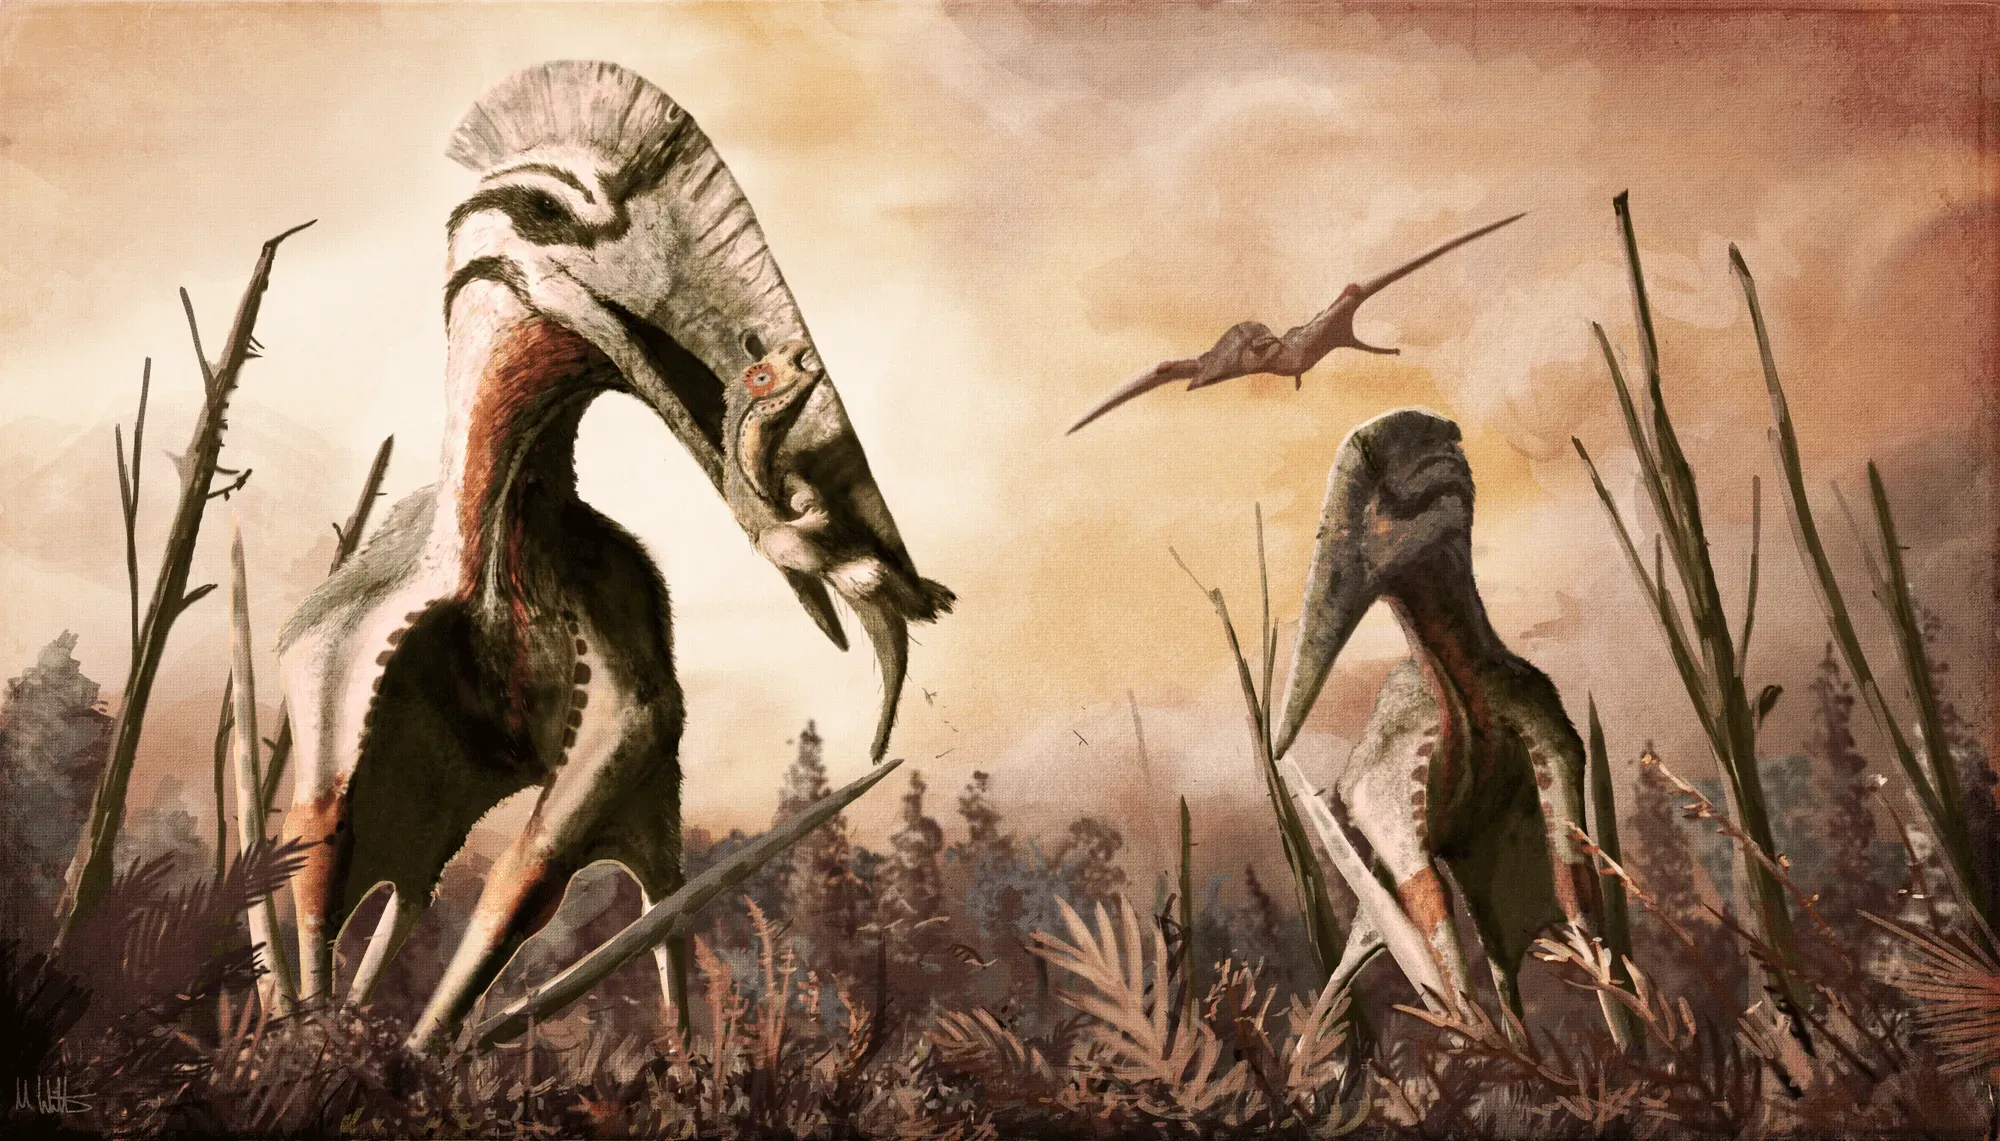 Hatzegopteryx is believed to be one of the largest animals ever known to fly!